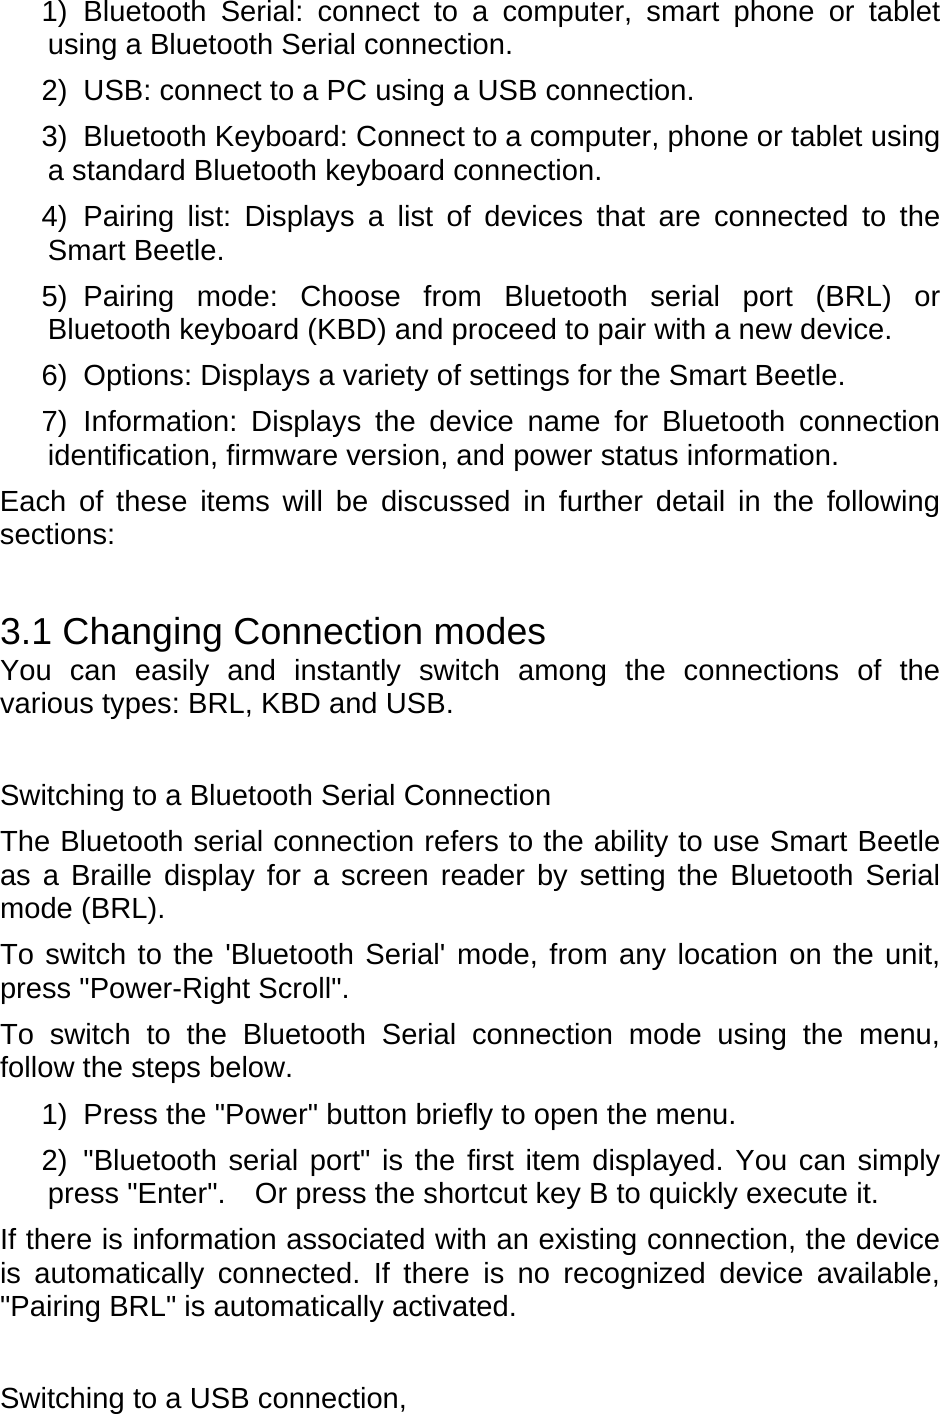 1) Bluetooth Serial: connect to a computer, smart phone or tablet using a Bluetooth Serial connection. 2)  USB: connect to a PC using a USB connection. 3)  Bluetooth Keyboard: Connect to a computer, phone or tablet using a standard Bluetooth keyboard connection. 4) Pairing list: Displays a list of devices that are connected to the Smart Beetle.   5) Pairing mode: Choose from Bluetooth serial port (BRL) or Bluetooth keyboard (KBD) and proceed to pair with a new device.   6)  Options: Displays a variety of settings for the Smart Beetle.   7) Information: Displays the device name for Bluetooth connection identification, firmware version, and power status information.   Each of these items will be discussed in further detail in the following sections:  3.1 Changing Connection modes You can easily and instantly switch among the connections of the various types: BRL, KBD and USB.    Switching to a Bluetooth Serial Connection The Bluetooth serial connection refers to the ability to use Smart Beetle as a Braille display for a screen reader by setting the Bluetooth Serial mode (BRL).   To switch to the &apos;Bluetooth Serial&apos; mode, from any location on the unit, press &quot;Power-Right Scroll&quot;.   To switch to the Bluetooth Serial connection mode using the menu, follow the steps below.   1)  Press the &quot;Power&quot; button briefly to open the menu.   2) &quot;Bluetooth serial port&quot; is the first item displayed. You can simply press &quot;Enter&quot;.    Or press the shortcut key B to quickly execute it. If there is information associated with an existing connection, the device is automatically connected. If there is no recognized device available, &quot;Pairing BRL&quot; is automatically activated.    Switching to a USB connection, 